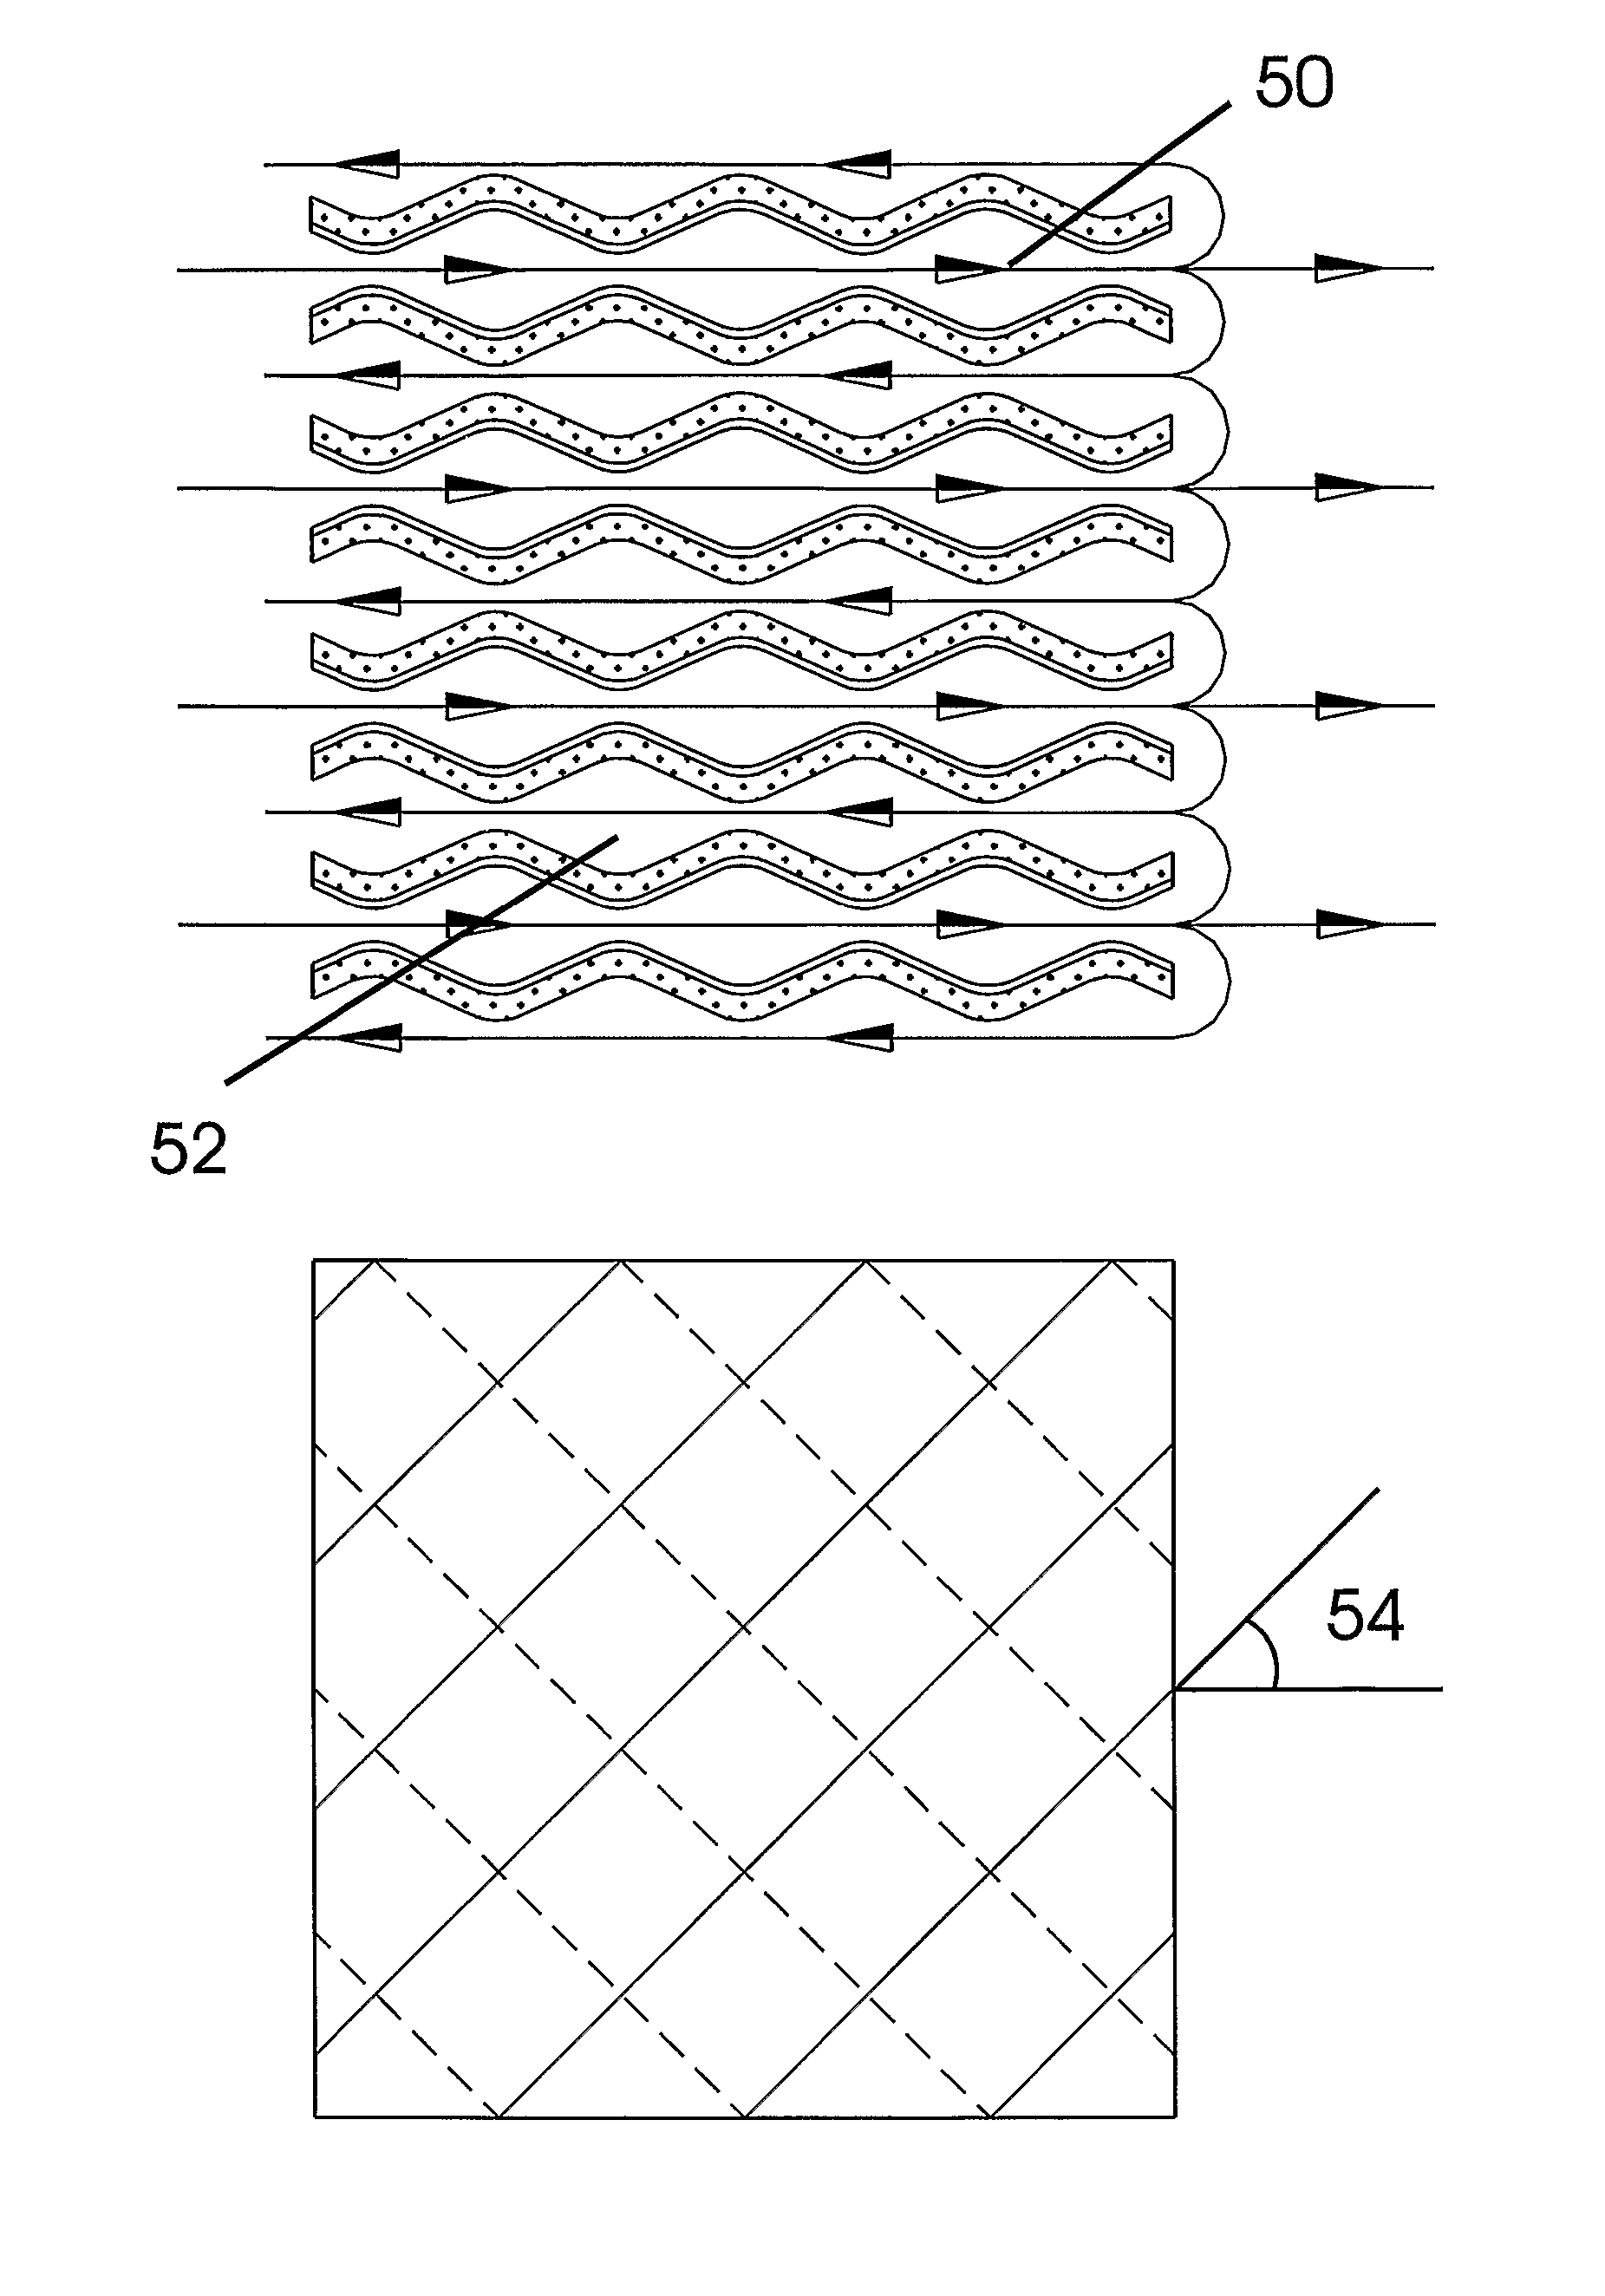 Method and materials for improving evaporative heat exchangers